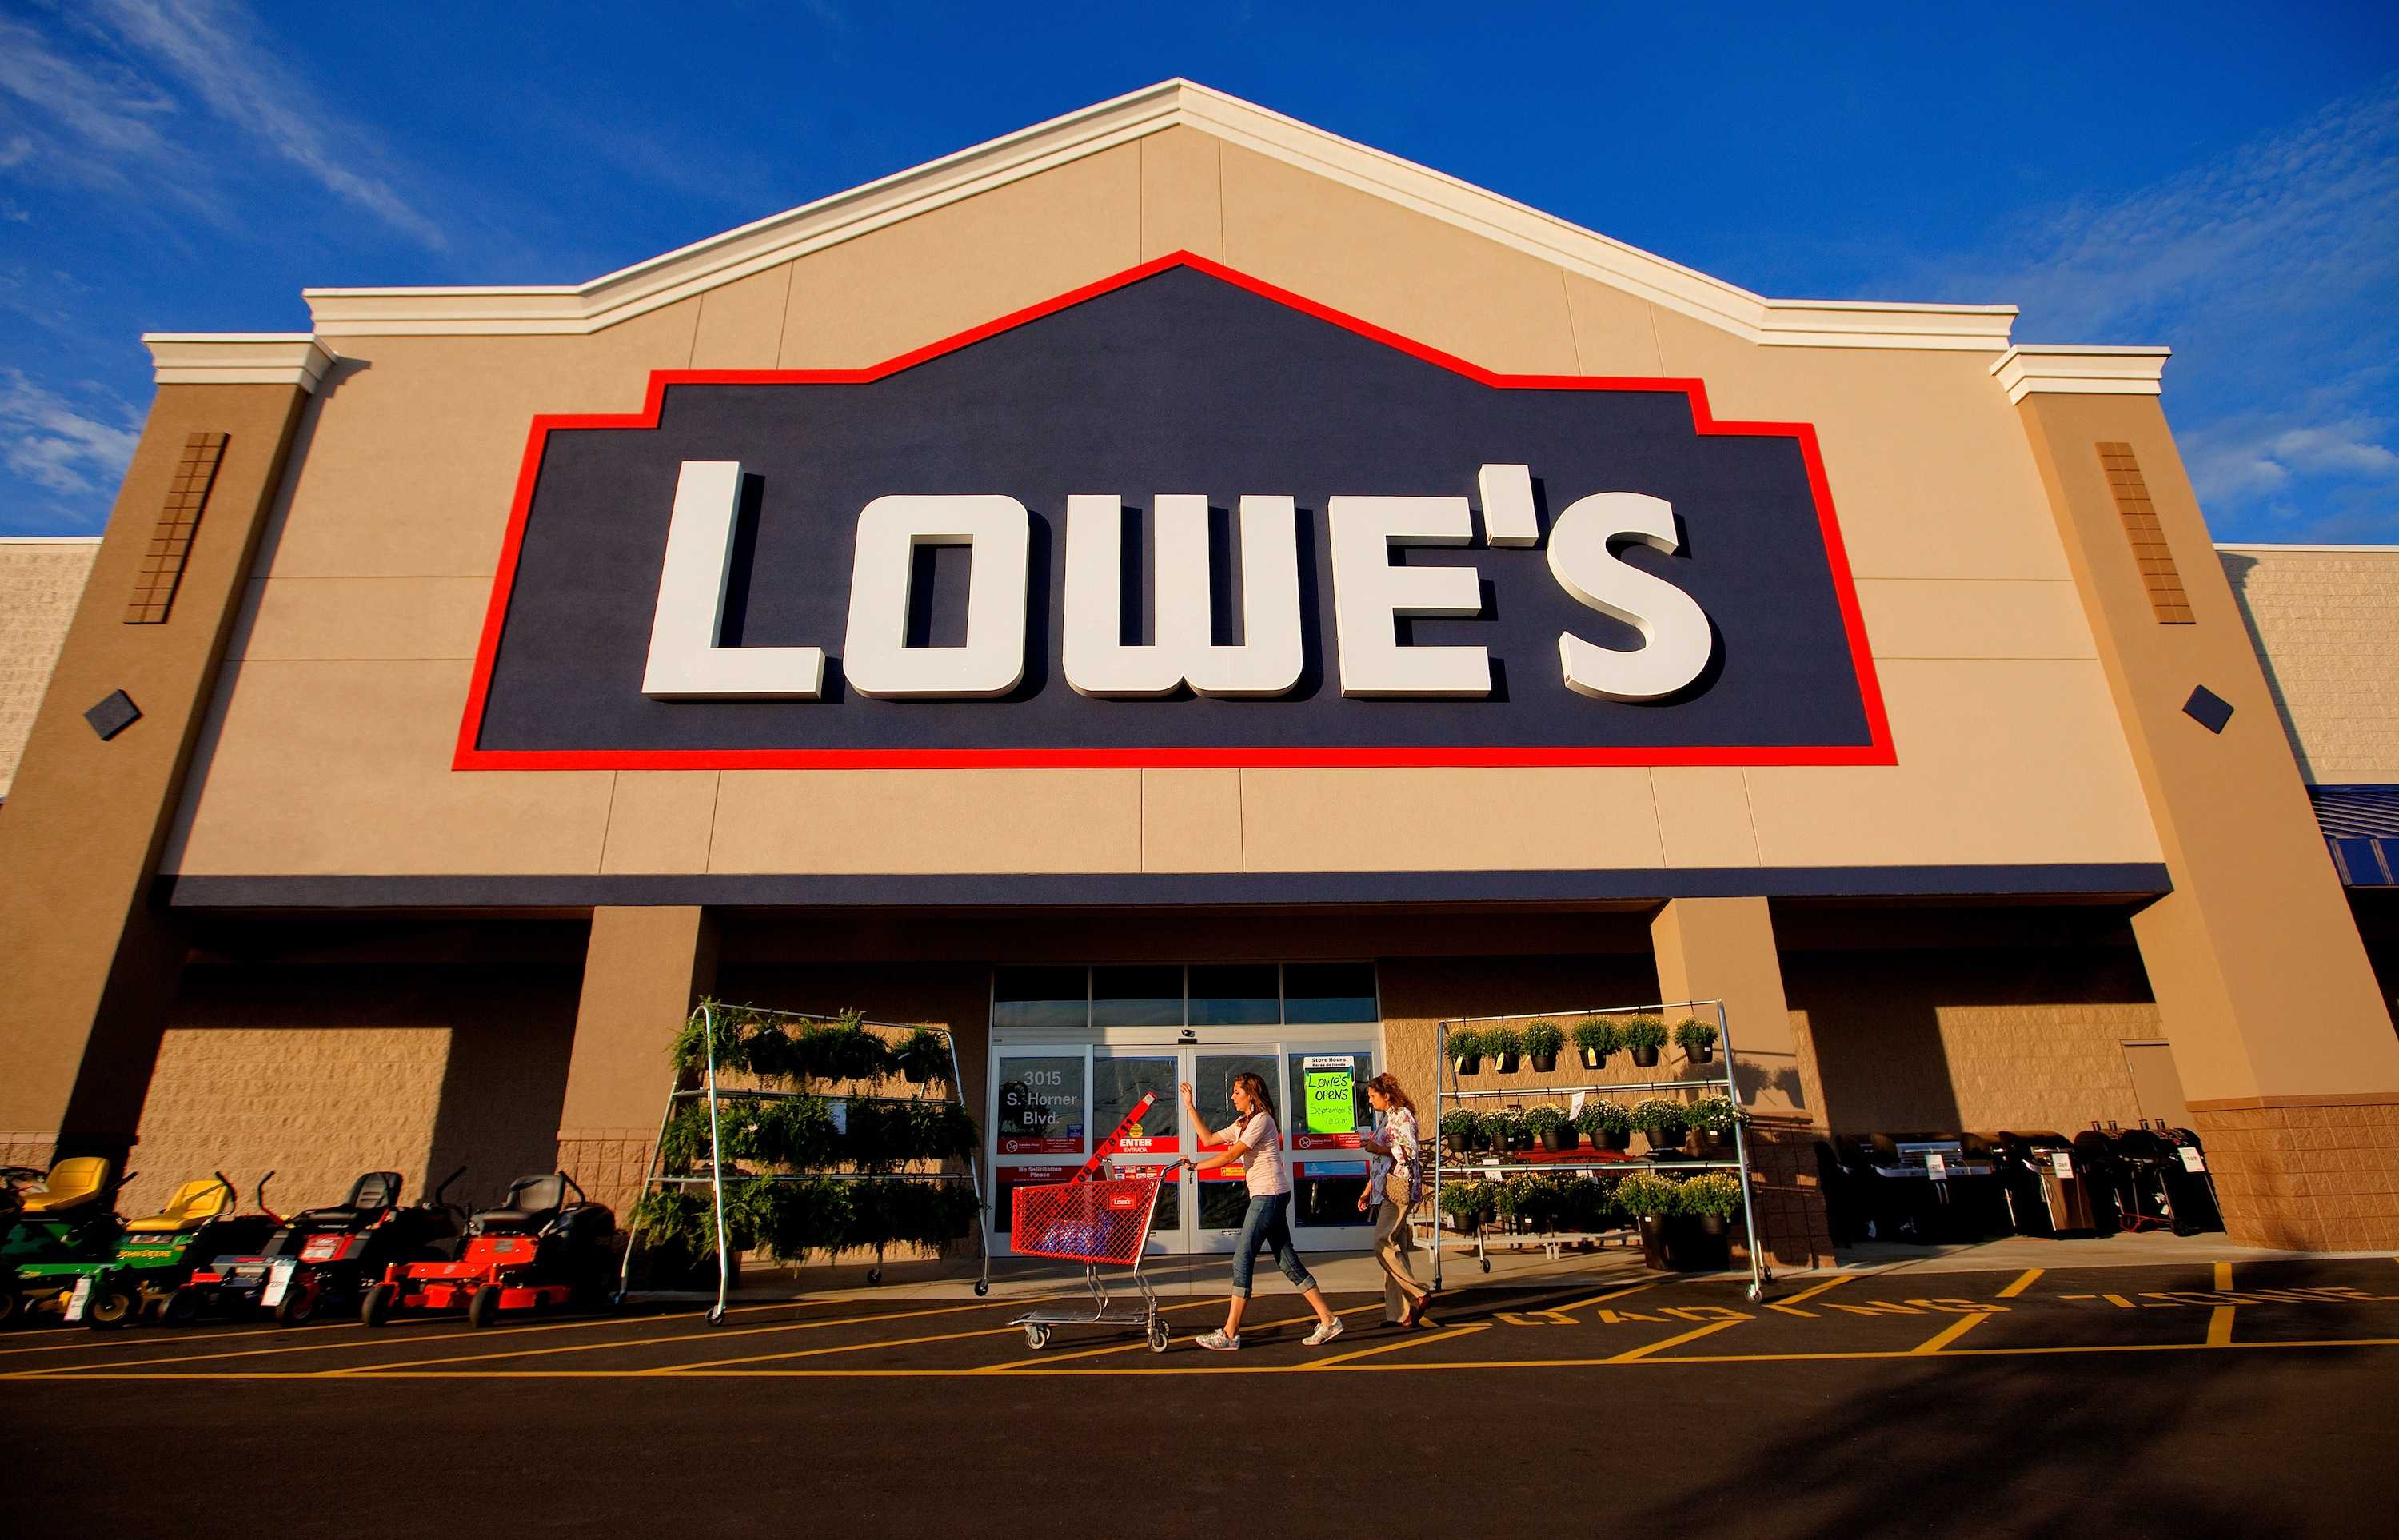 Lowes Store near me, Lowes near me